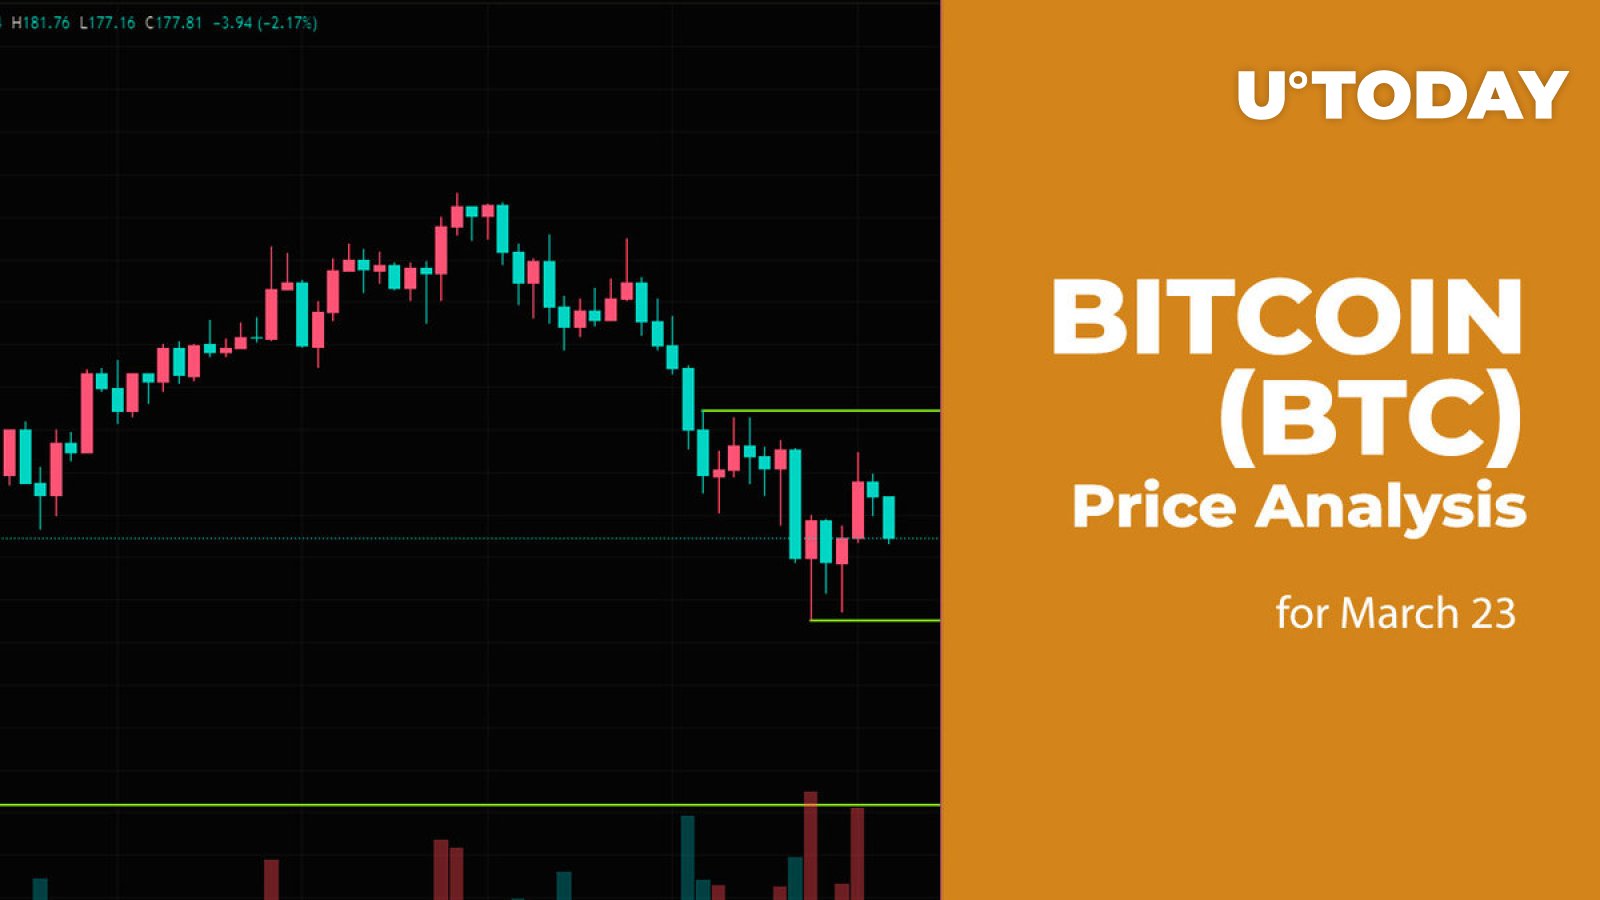 BTC Price Forecast: Will Bitcoin Hit ,000 or Drop Below ,000 on March 23?